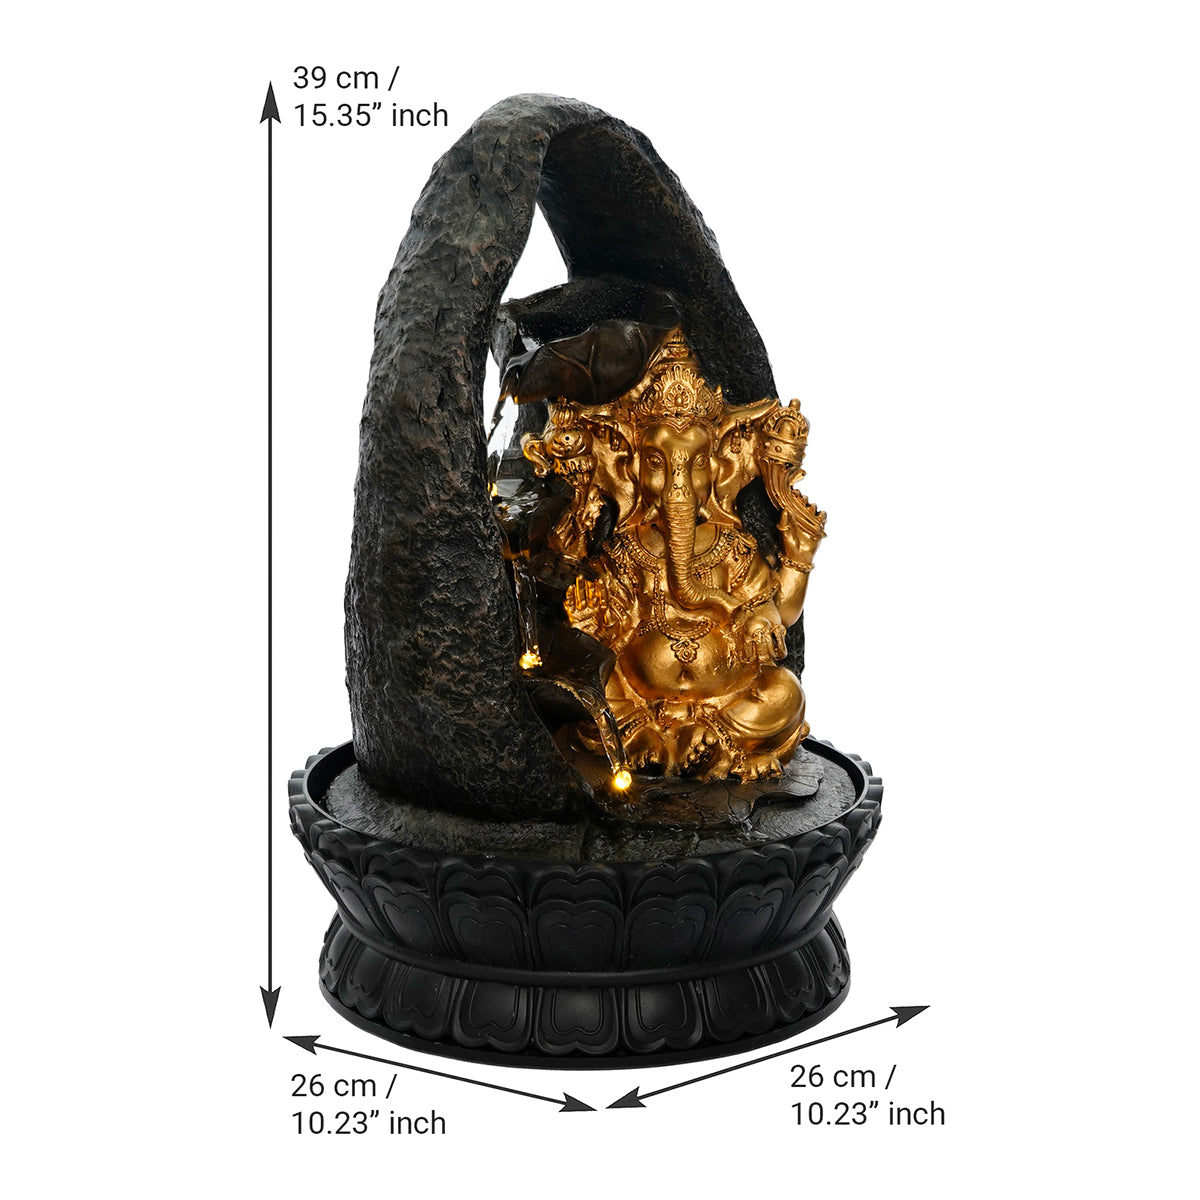 Polystone Black and Golden Decorative Lord Ganesha Idol Water Fountain With Light For Home/Office Décor 2